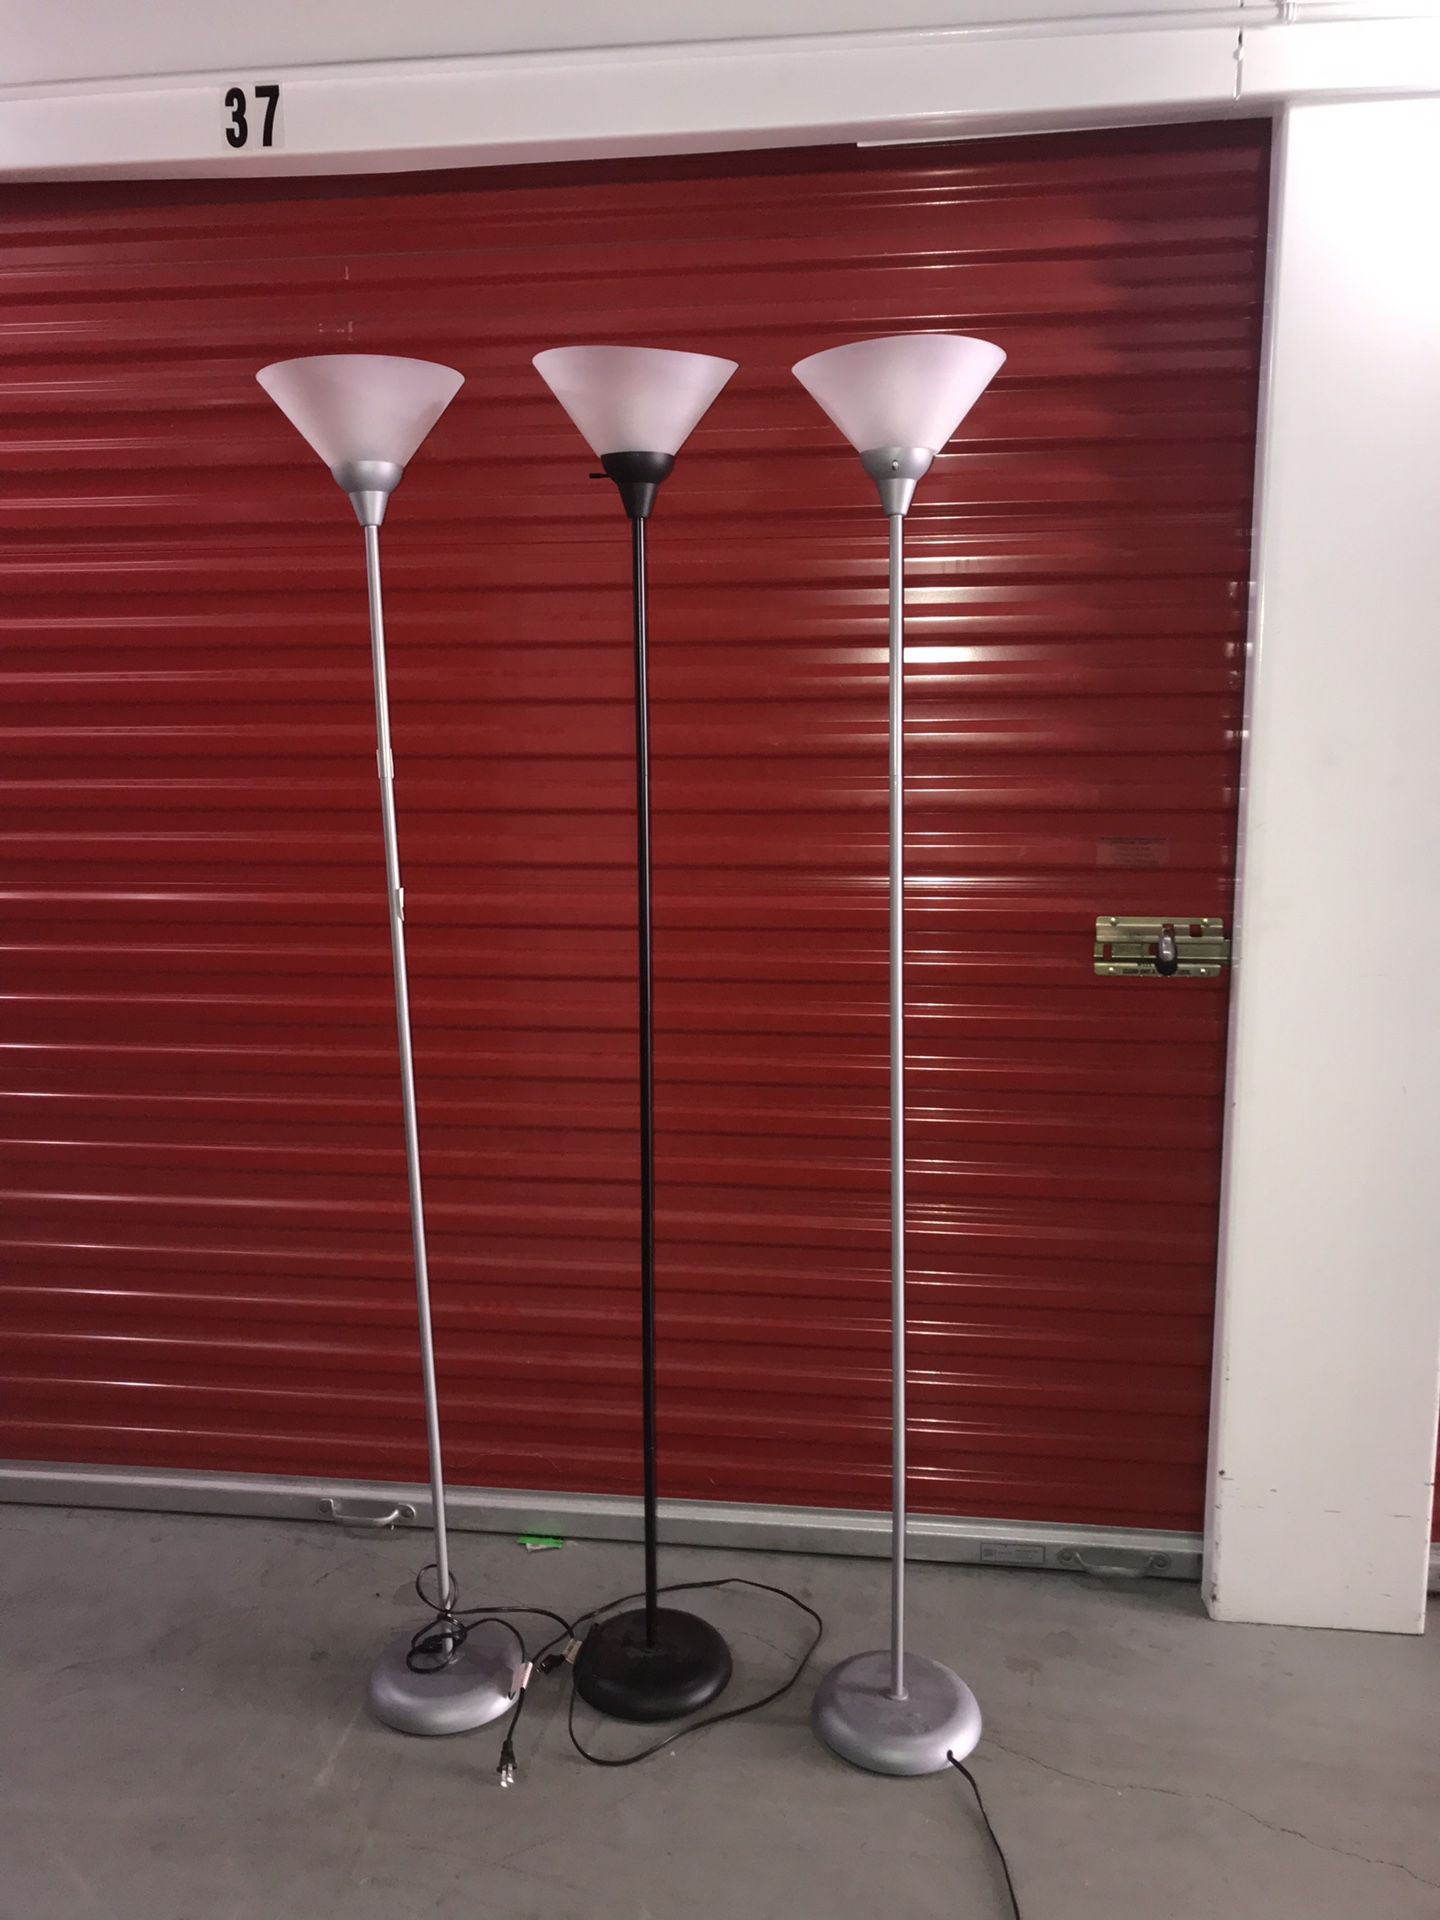 Floor lamps $30 for all